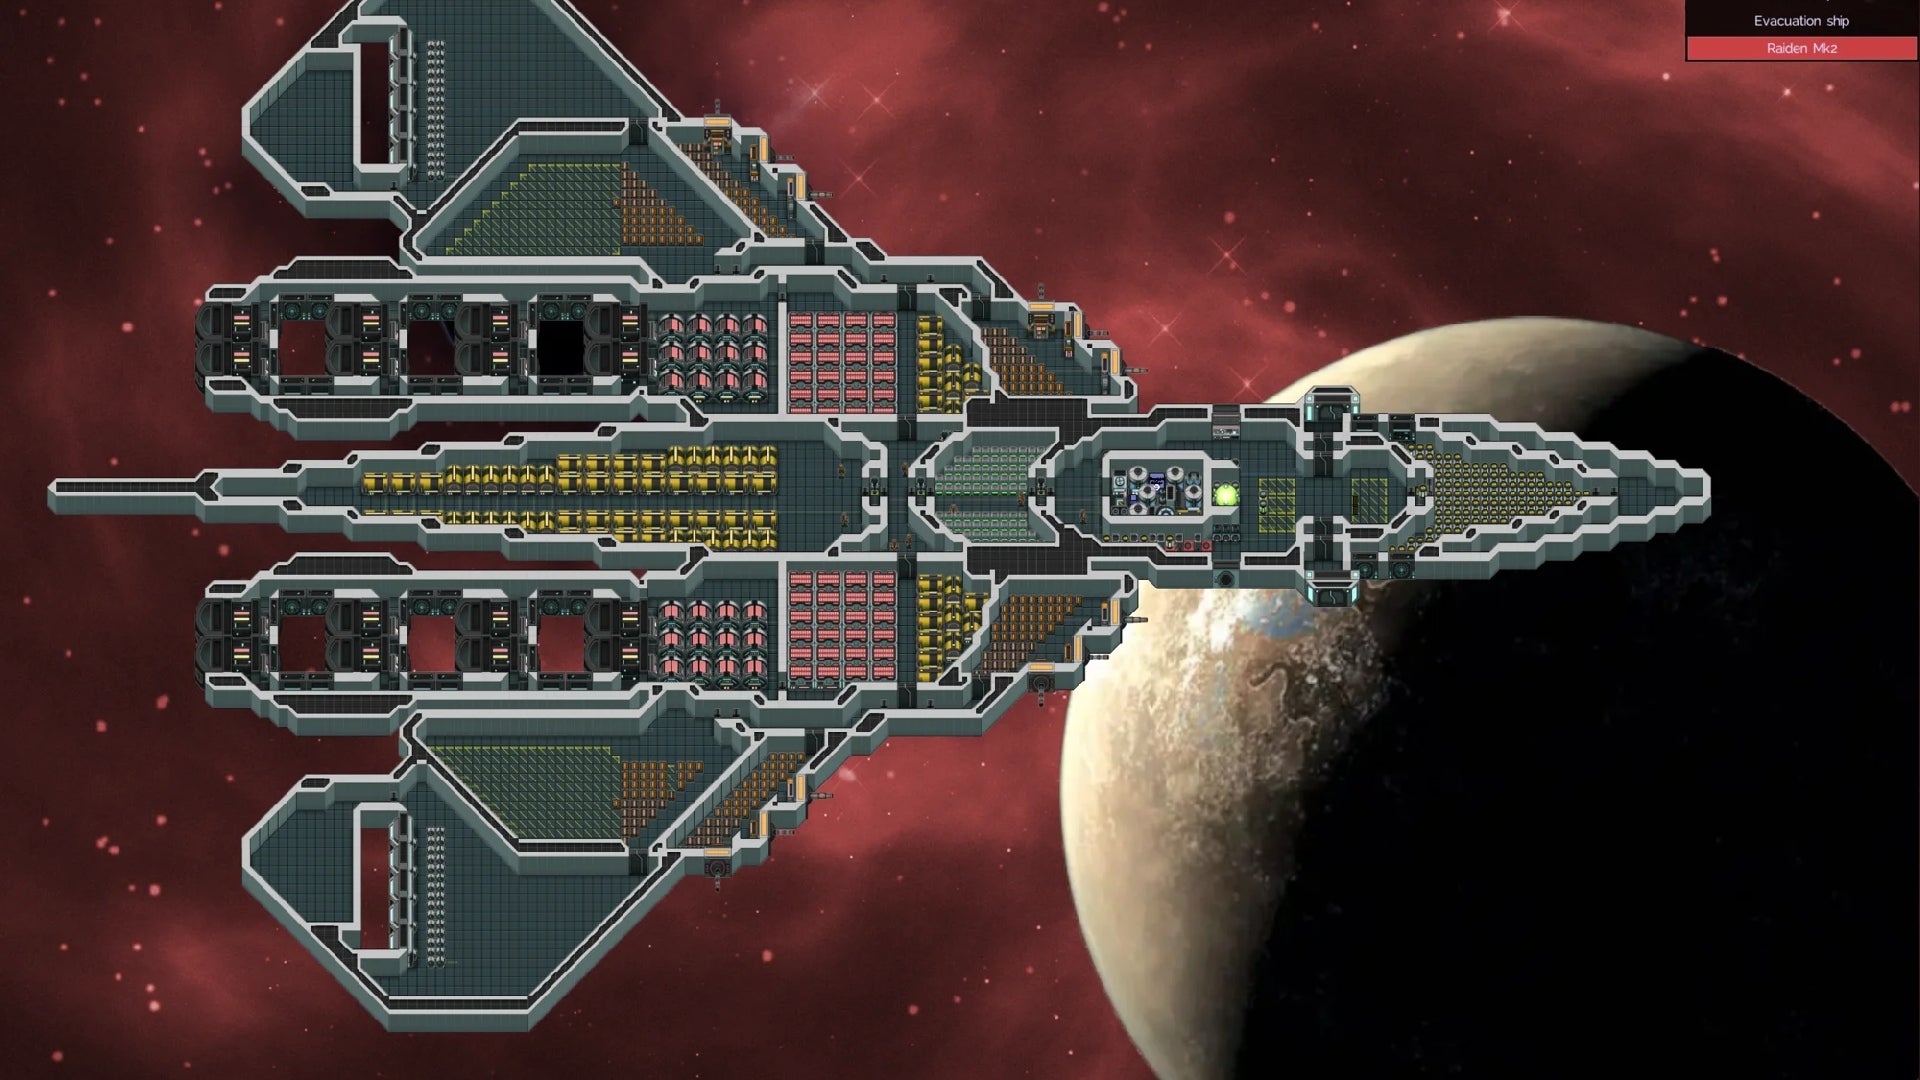 The Last Starship's alpha 2 adds free roam mode, ship docking, and much more